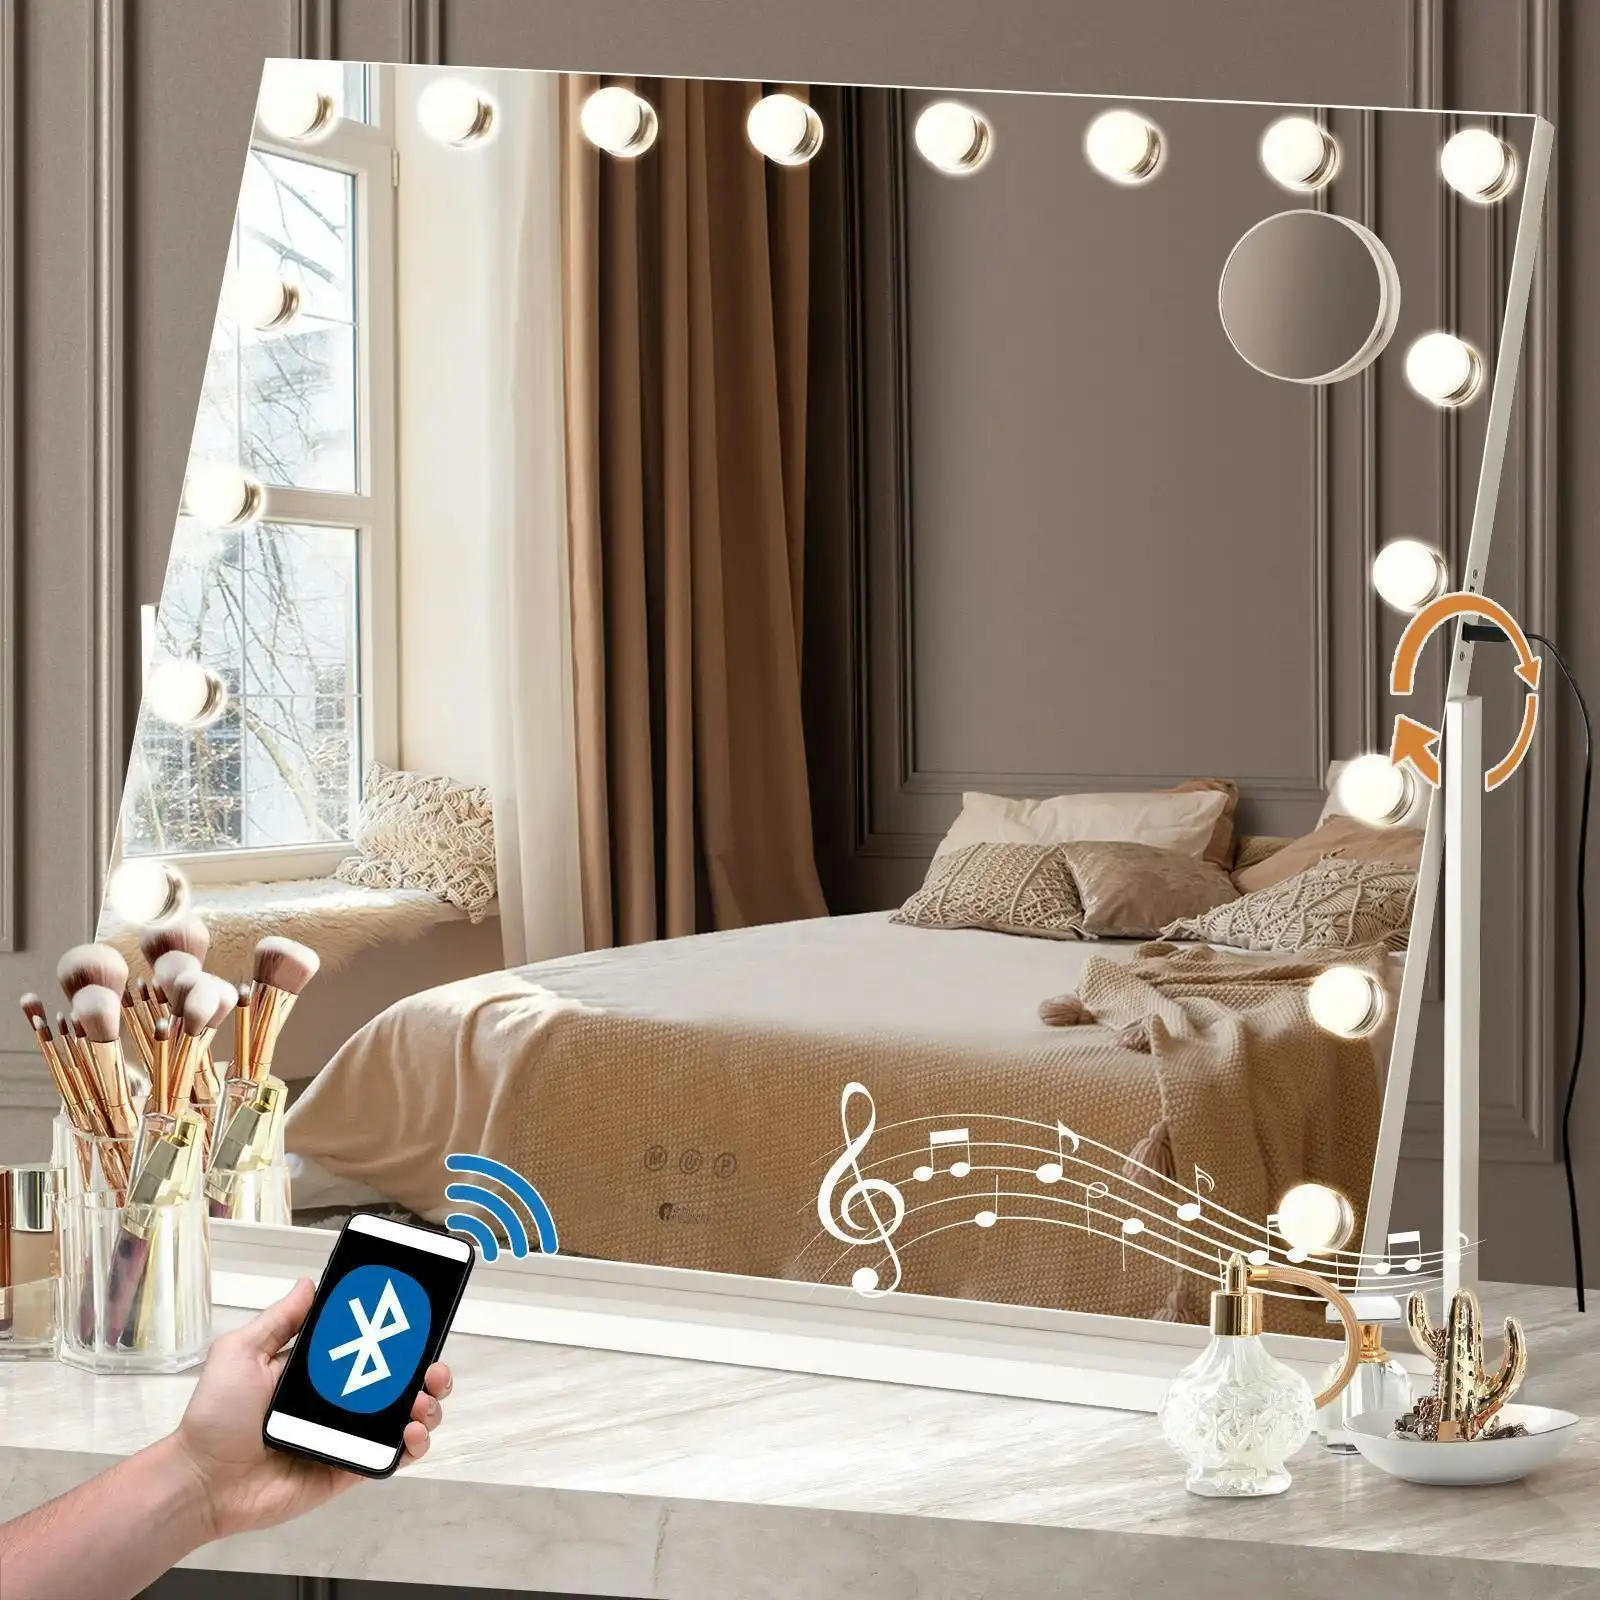 Oikiture 83x69cm Makeup Mirror Rotatable Bluetooth LED Hollywood Mirrors Magnifying